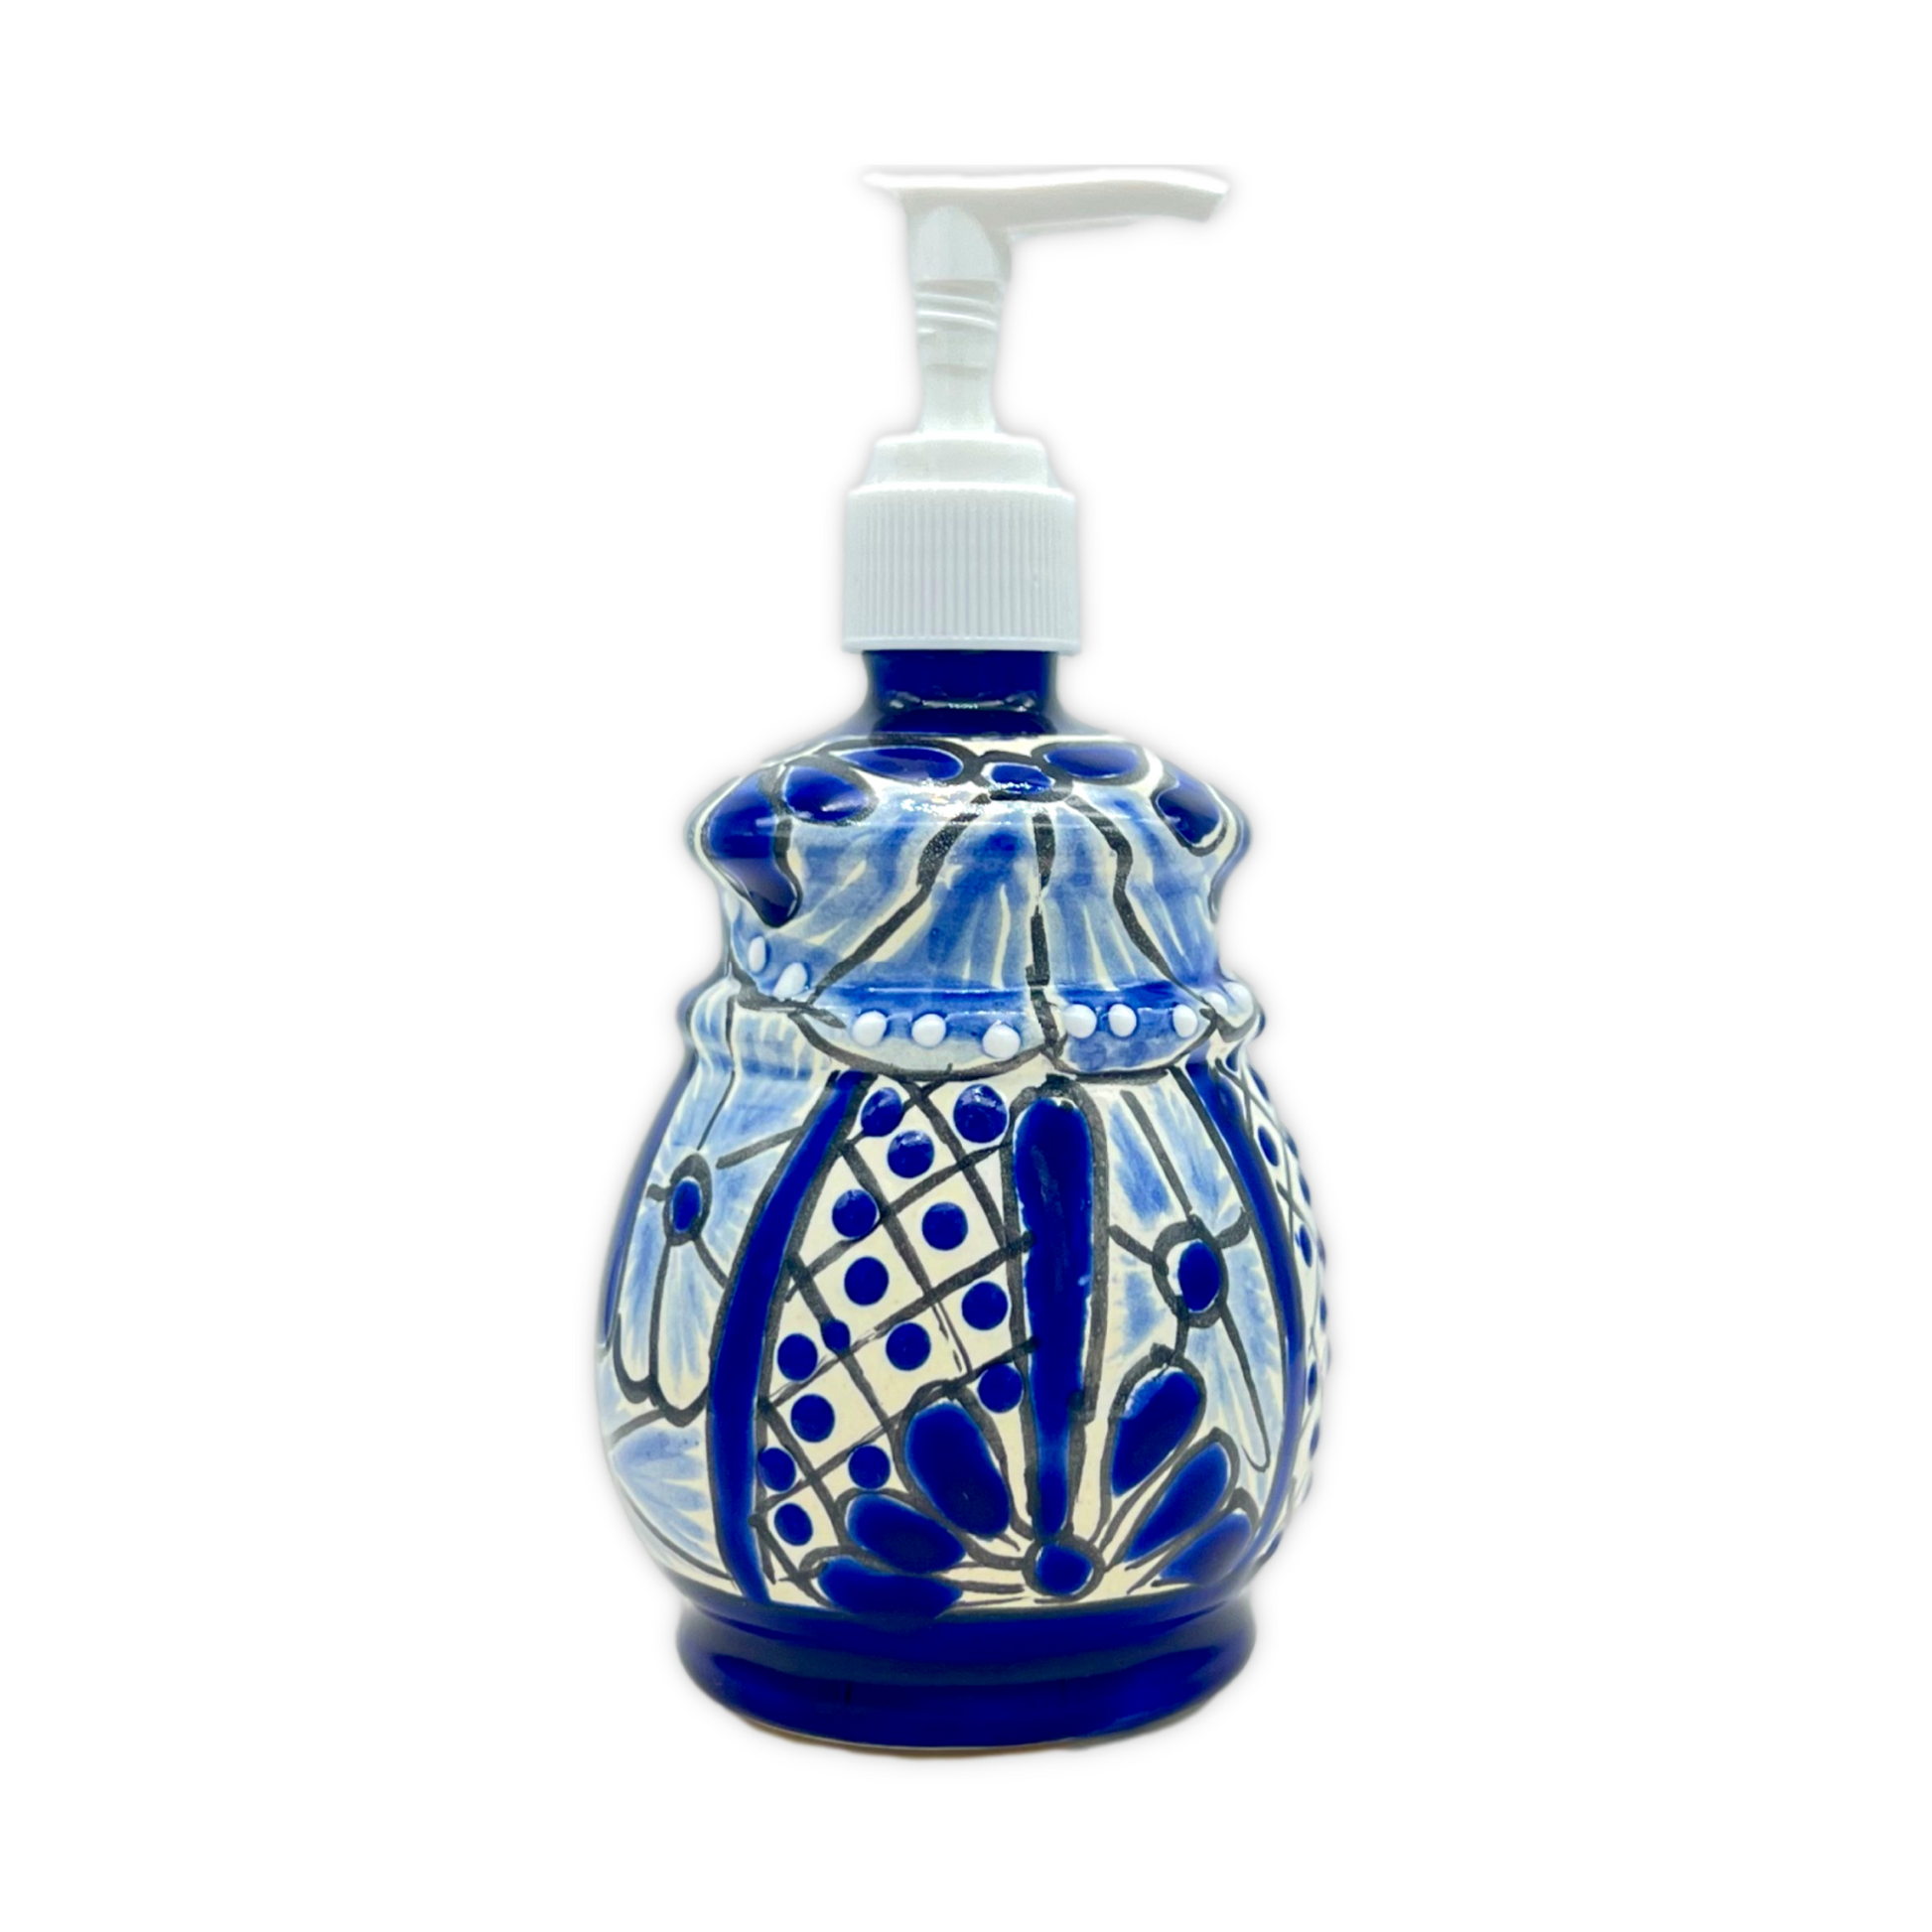 Hand-painted Talavera Ceramic Soap Dispenser in blue and white, a unique addition to kitchen or bathroom decor. side 